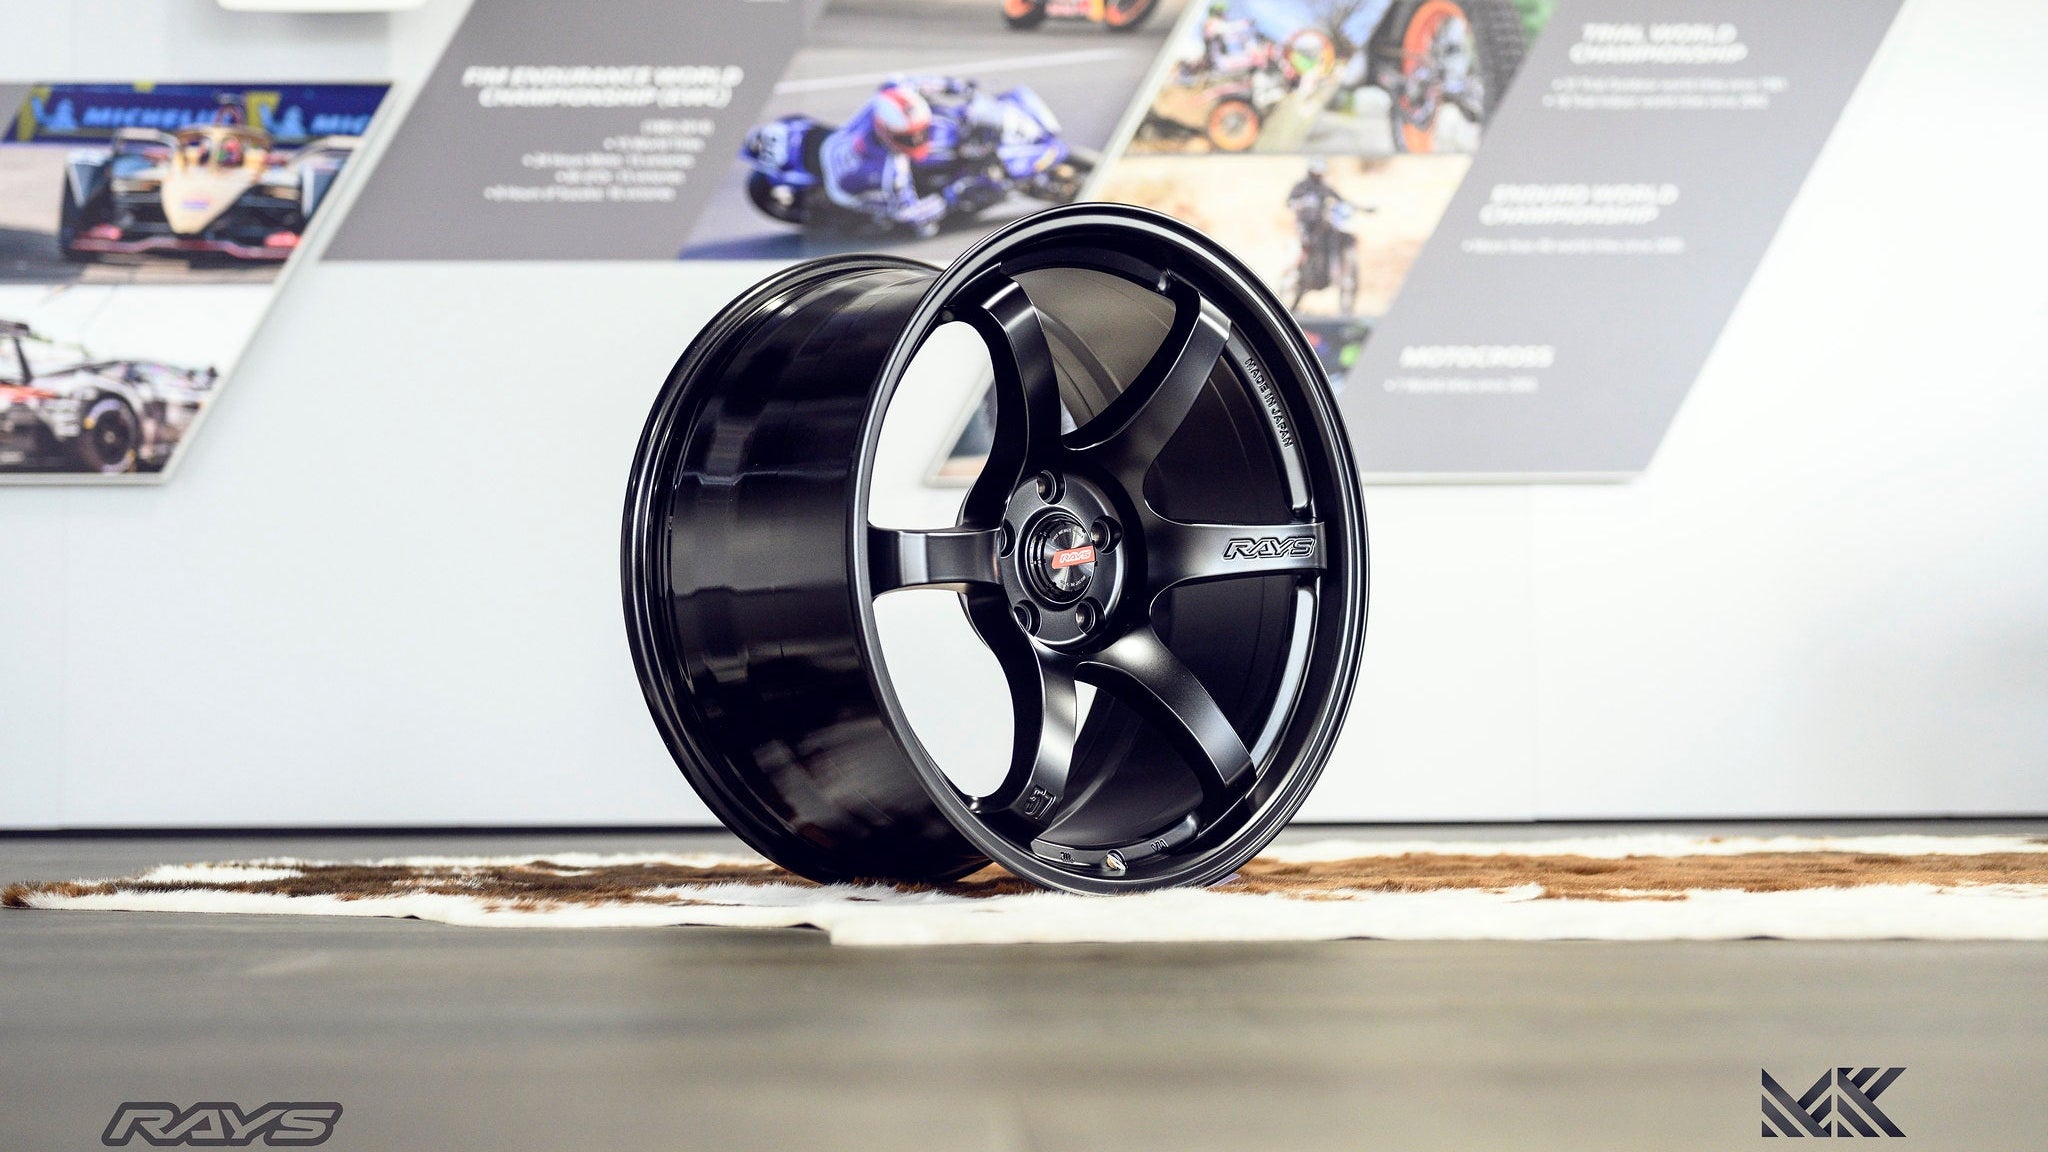 gramLIGHTS 57DR 18" Single Units - Premium Wheels from Gram Lights - From just $600.00! Shop now at MK MOTORSPORTS